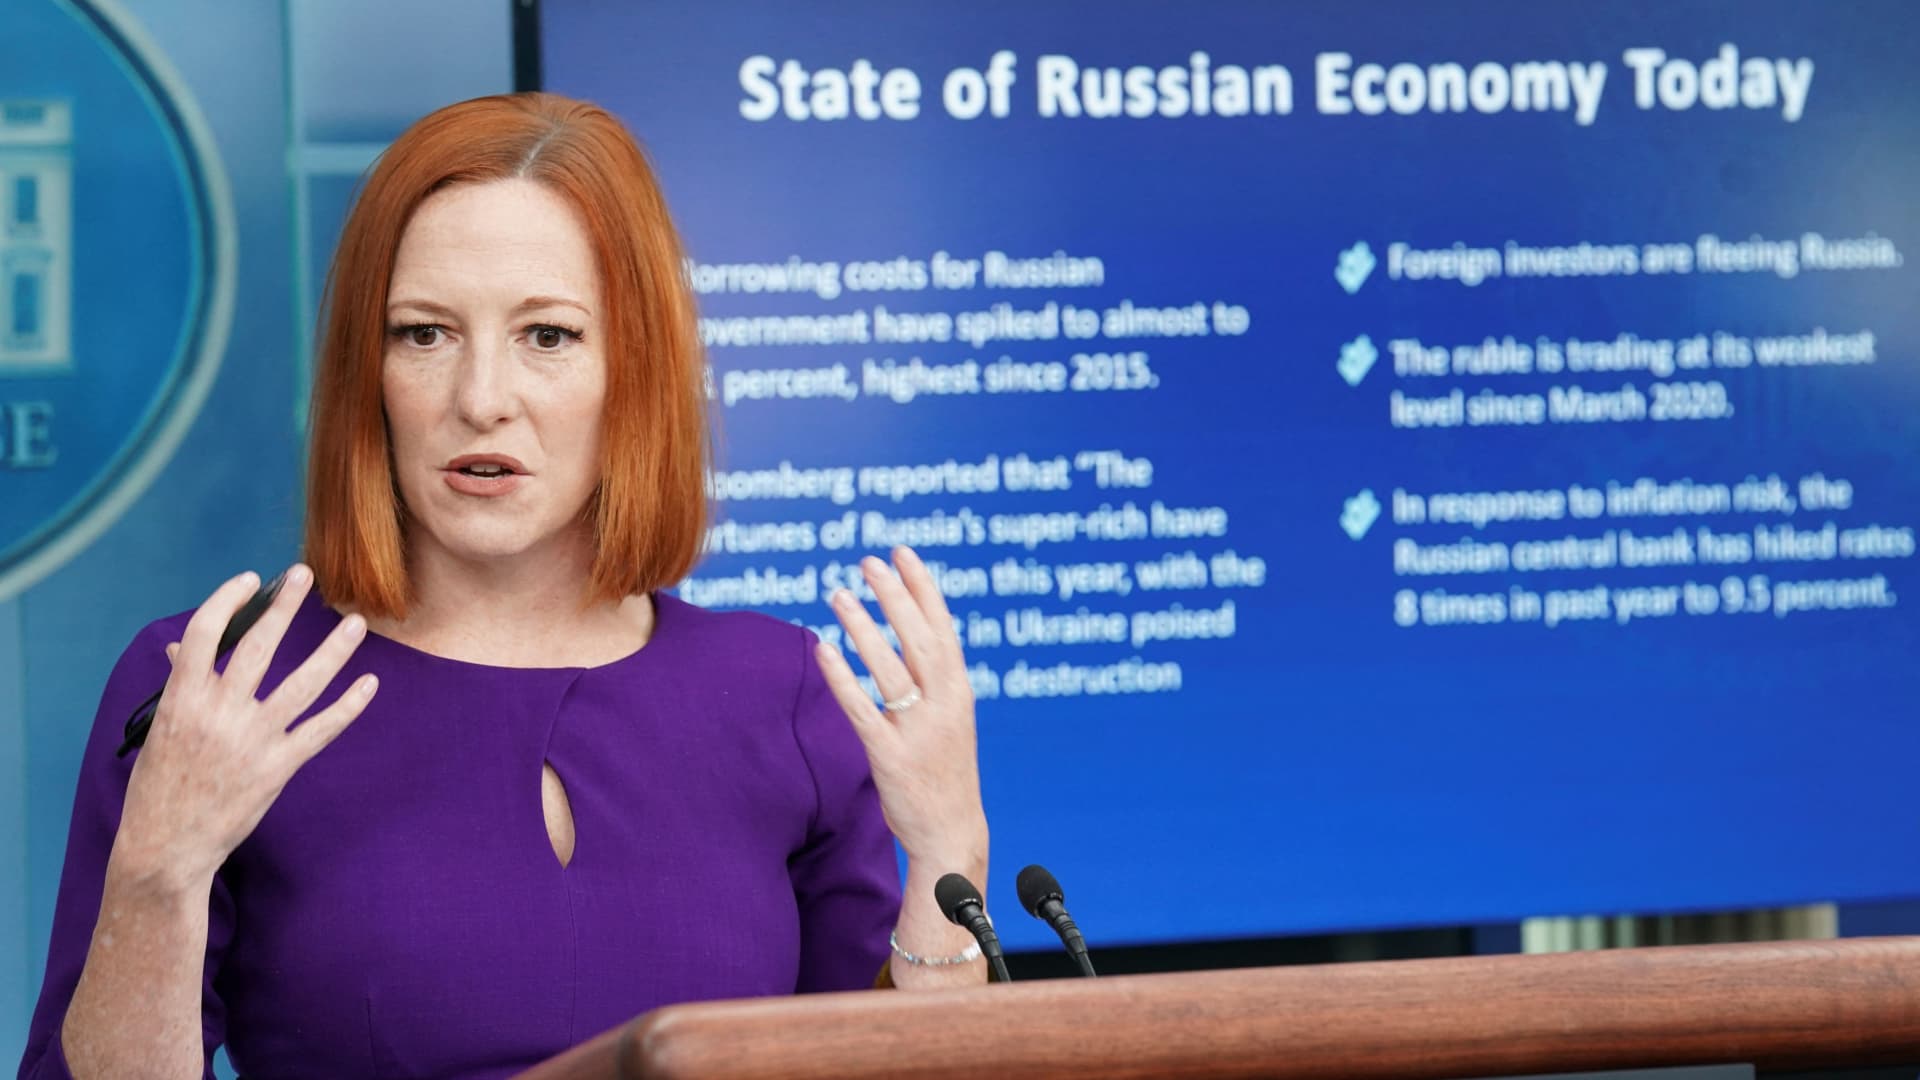 White House press secretary Jen Psaki speaks about the Russian economy during a press briefing at the White House in Washington, February 23, 2022.